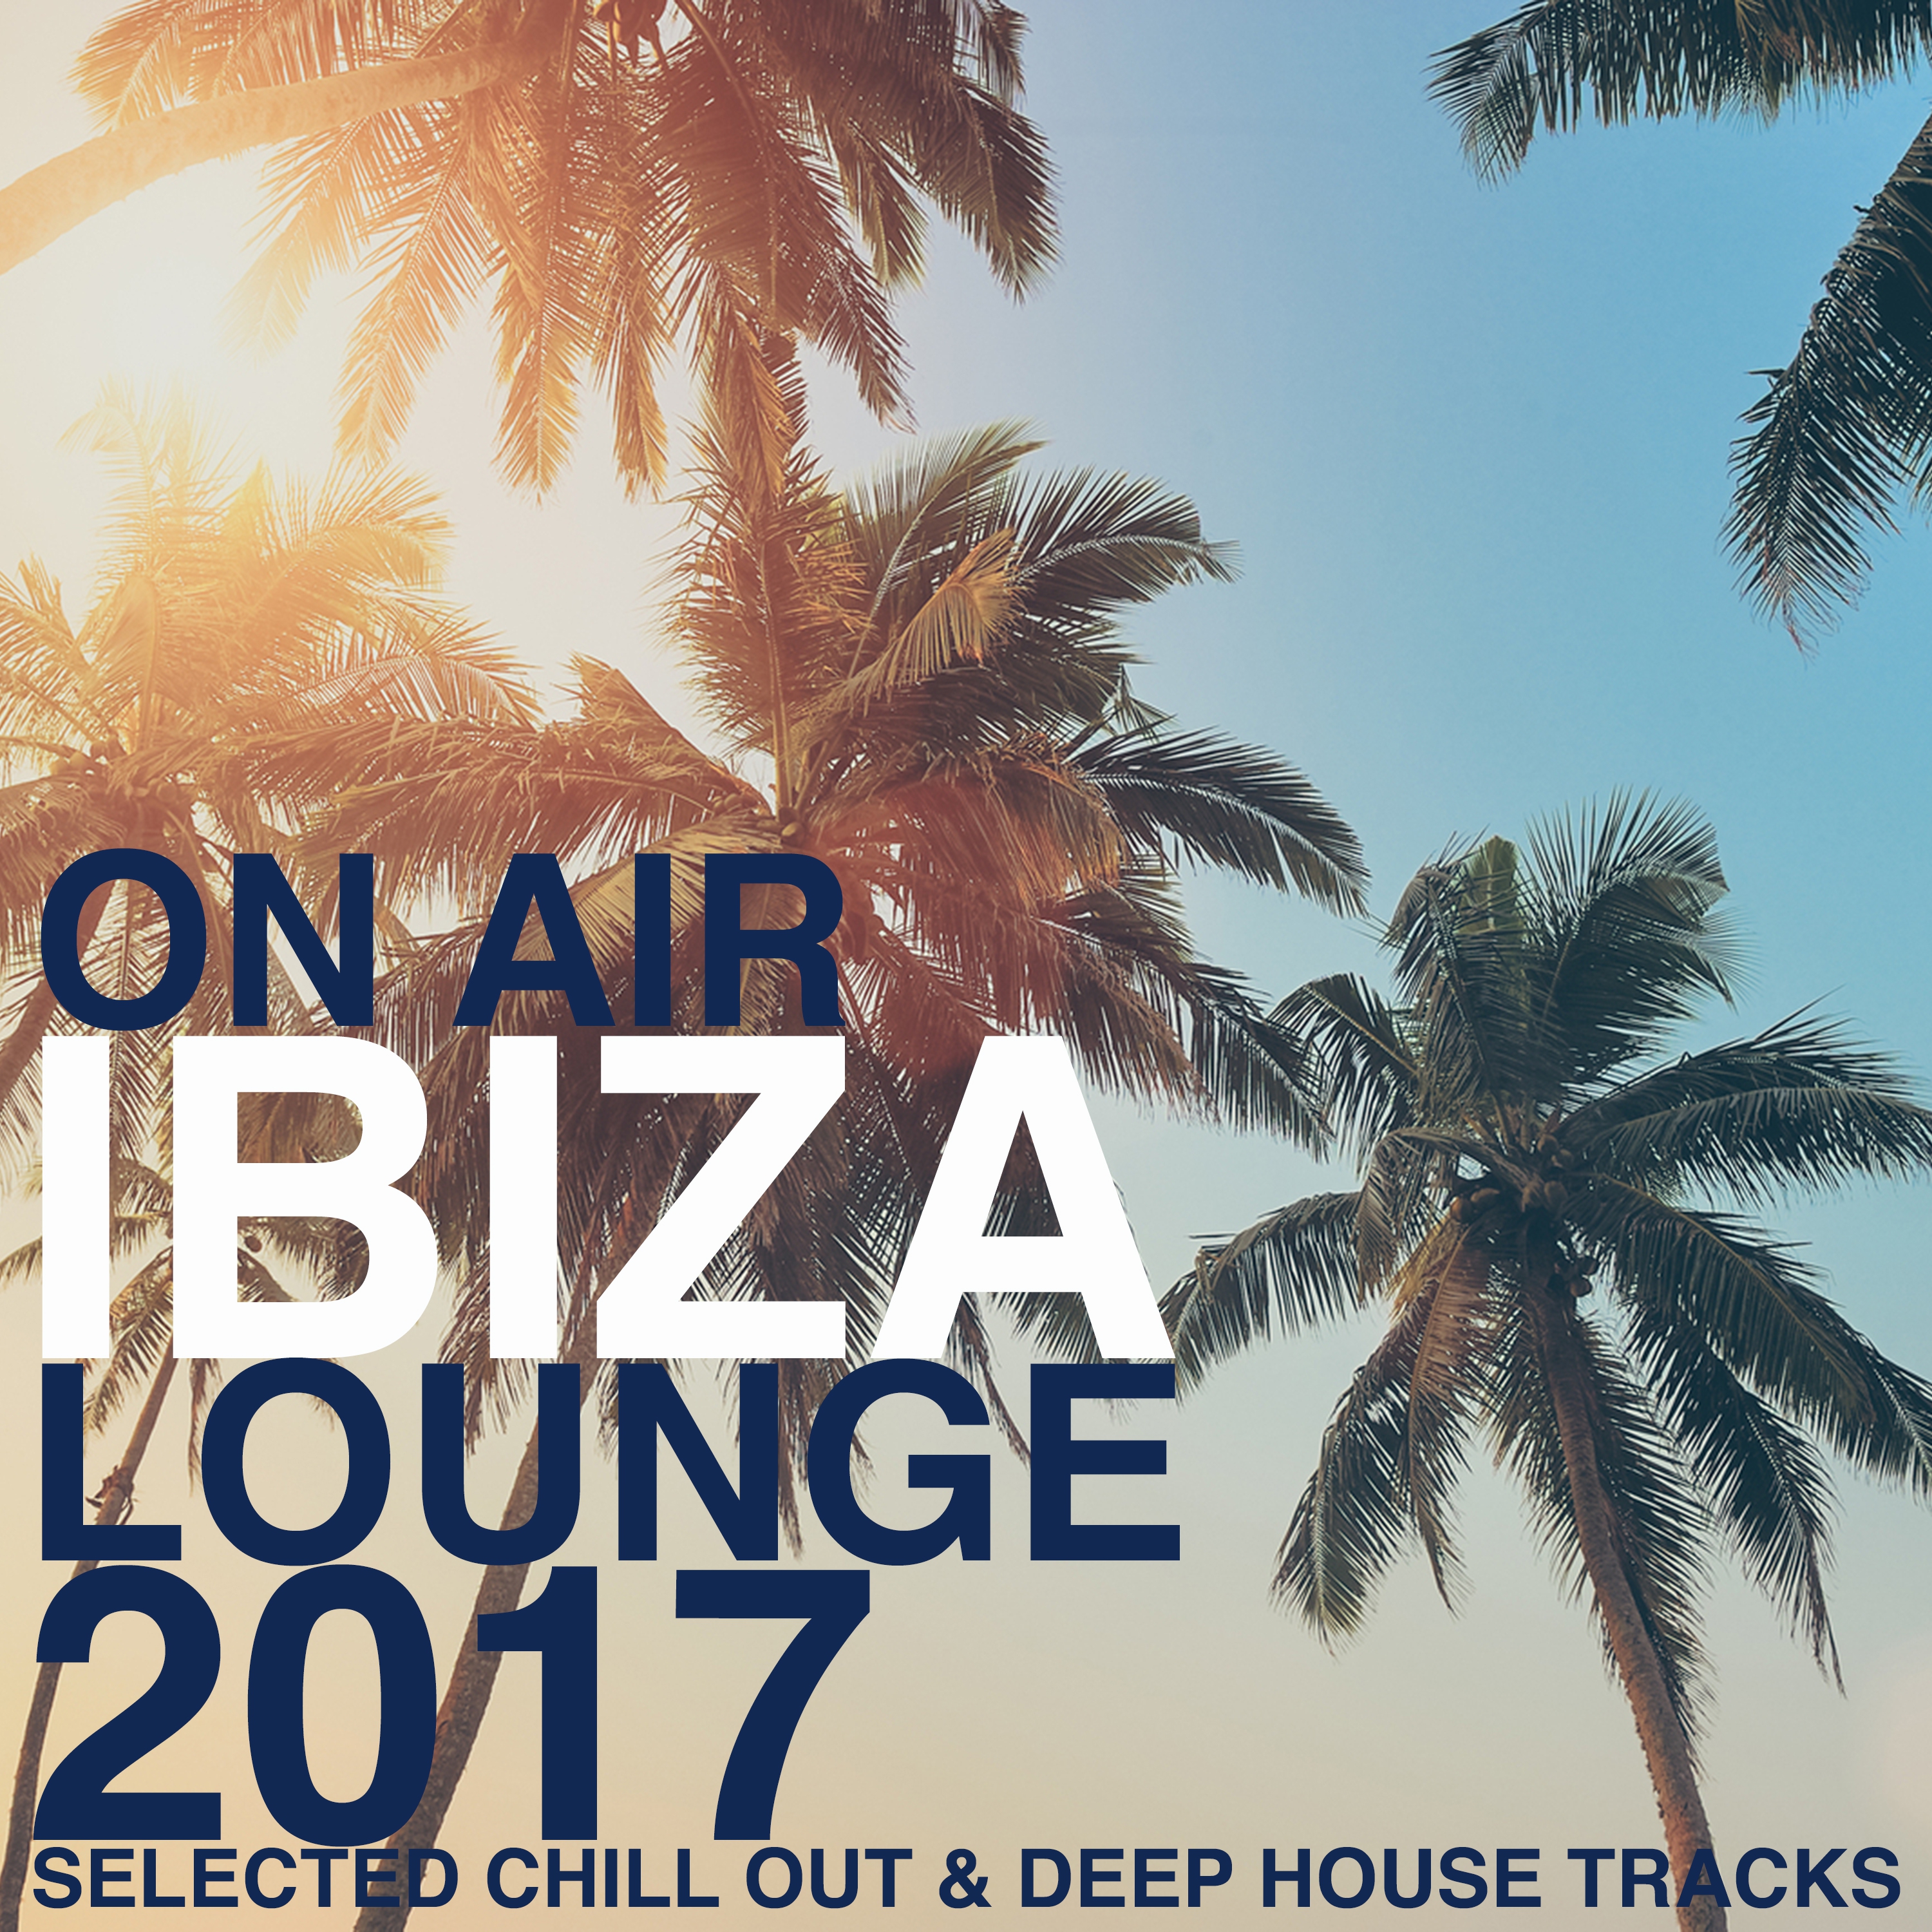 On Air Ibiza Lounge 2017 (Selected Chill Out & Deep House Tracks)